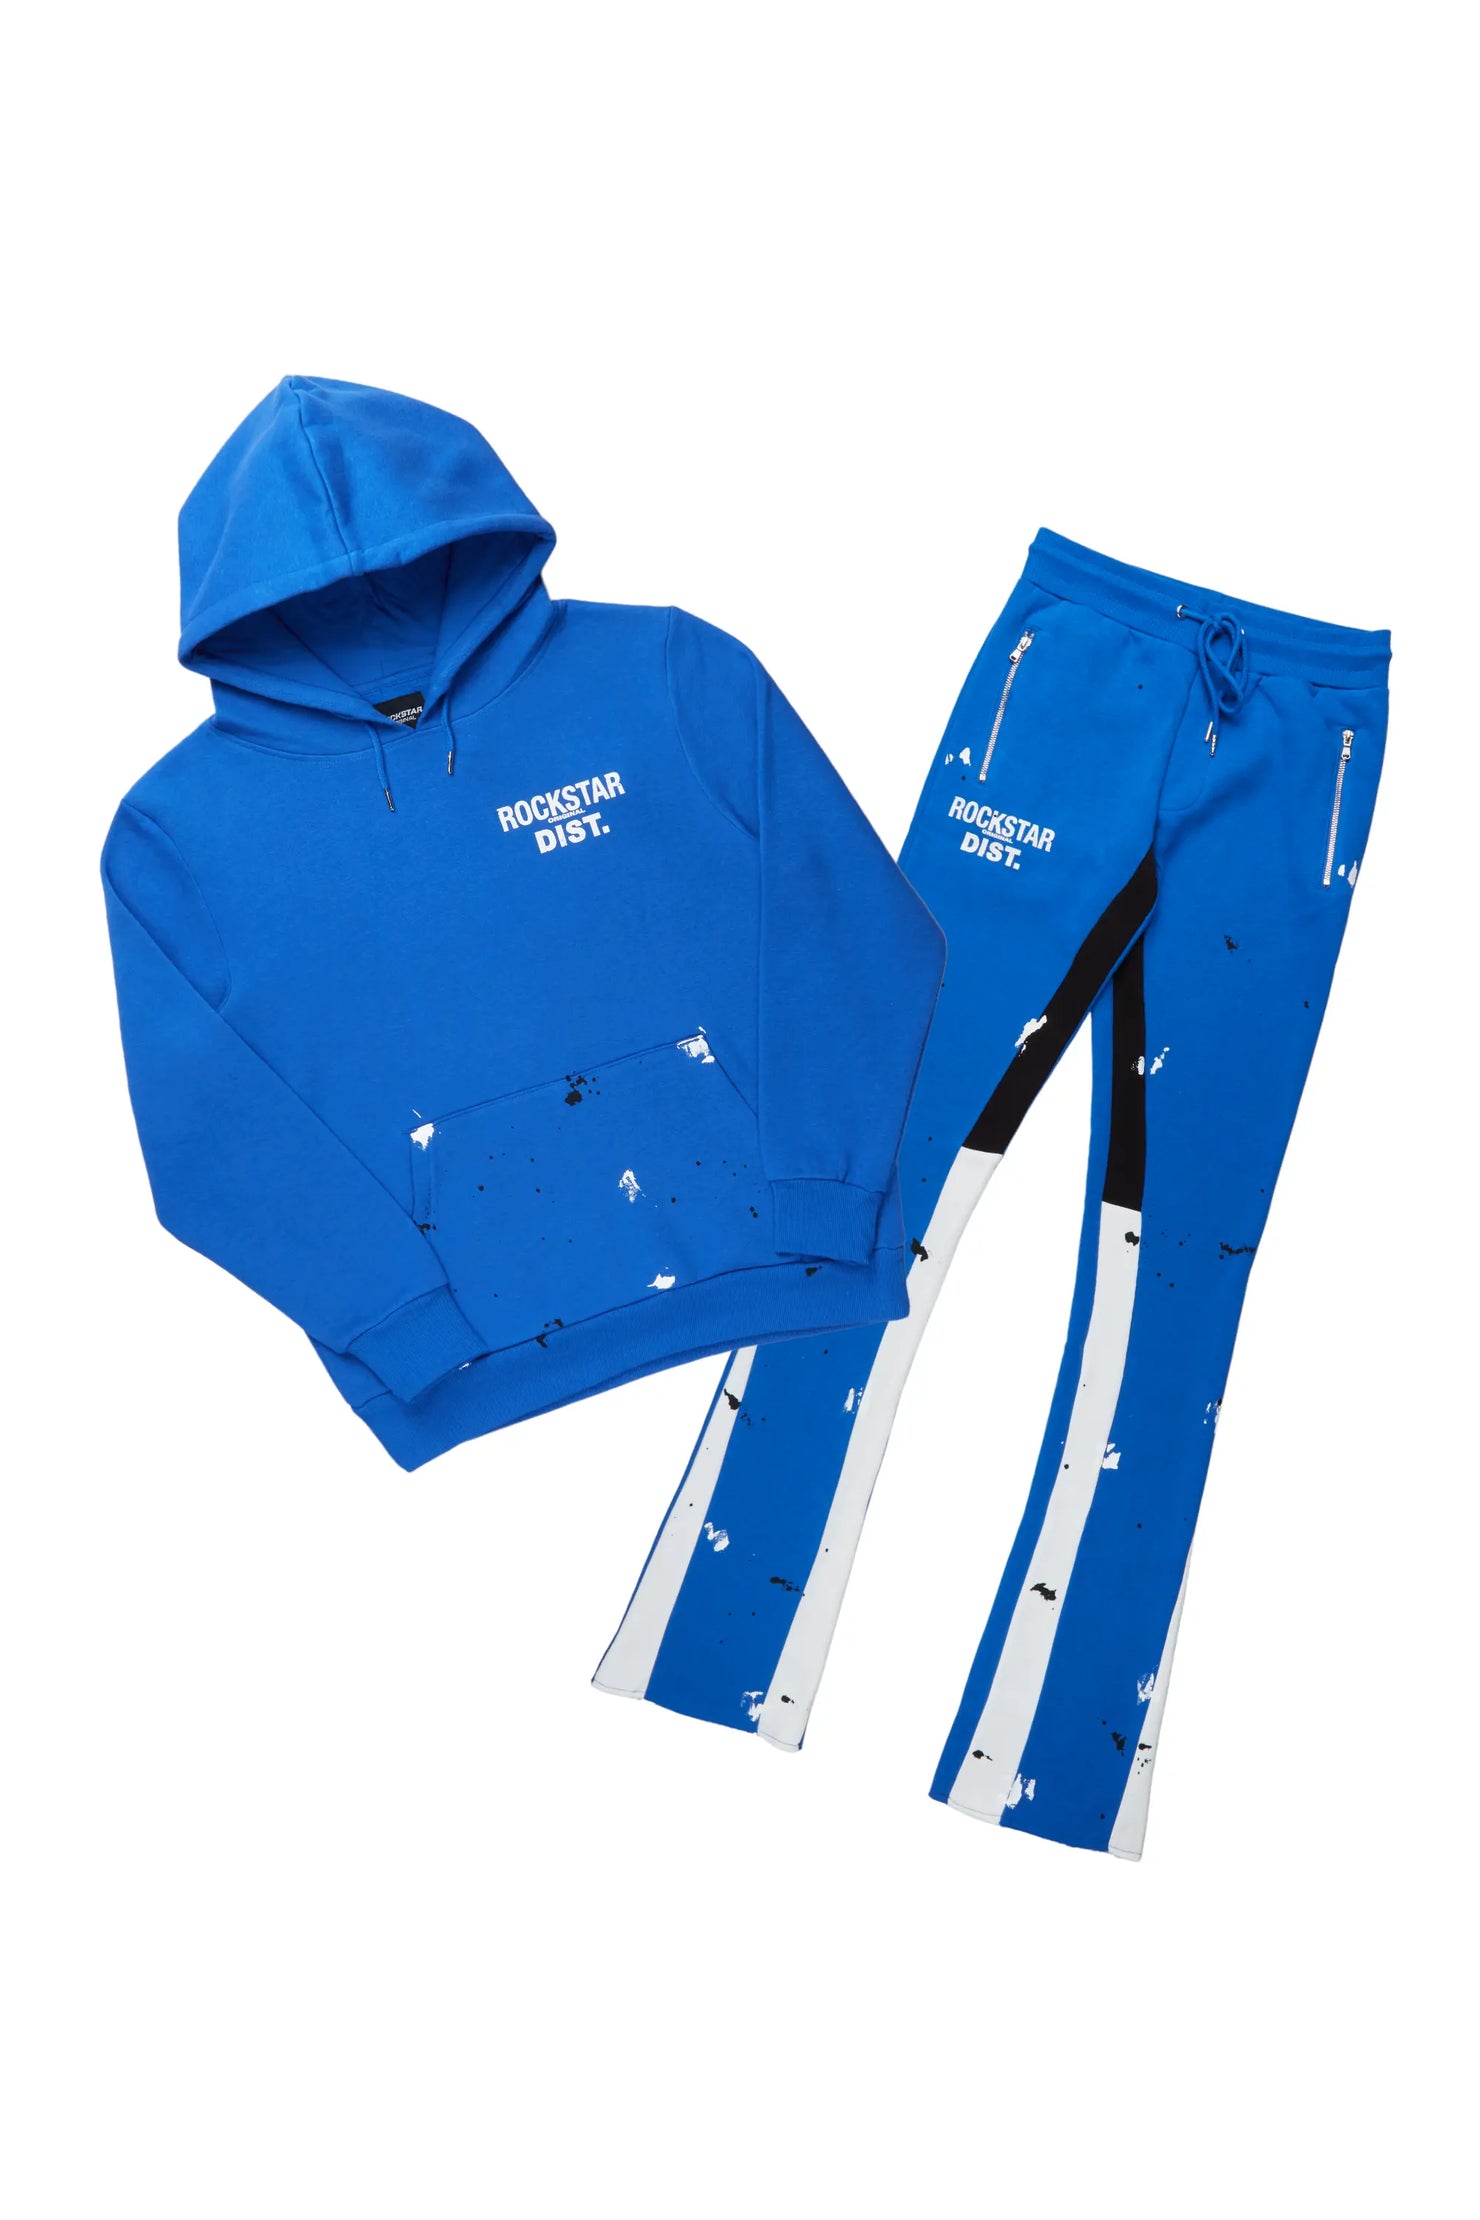 Jaco Royal Blue Hoodie Stacked Flare Pant Track Set